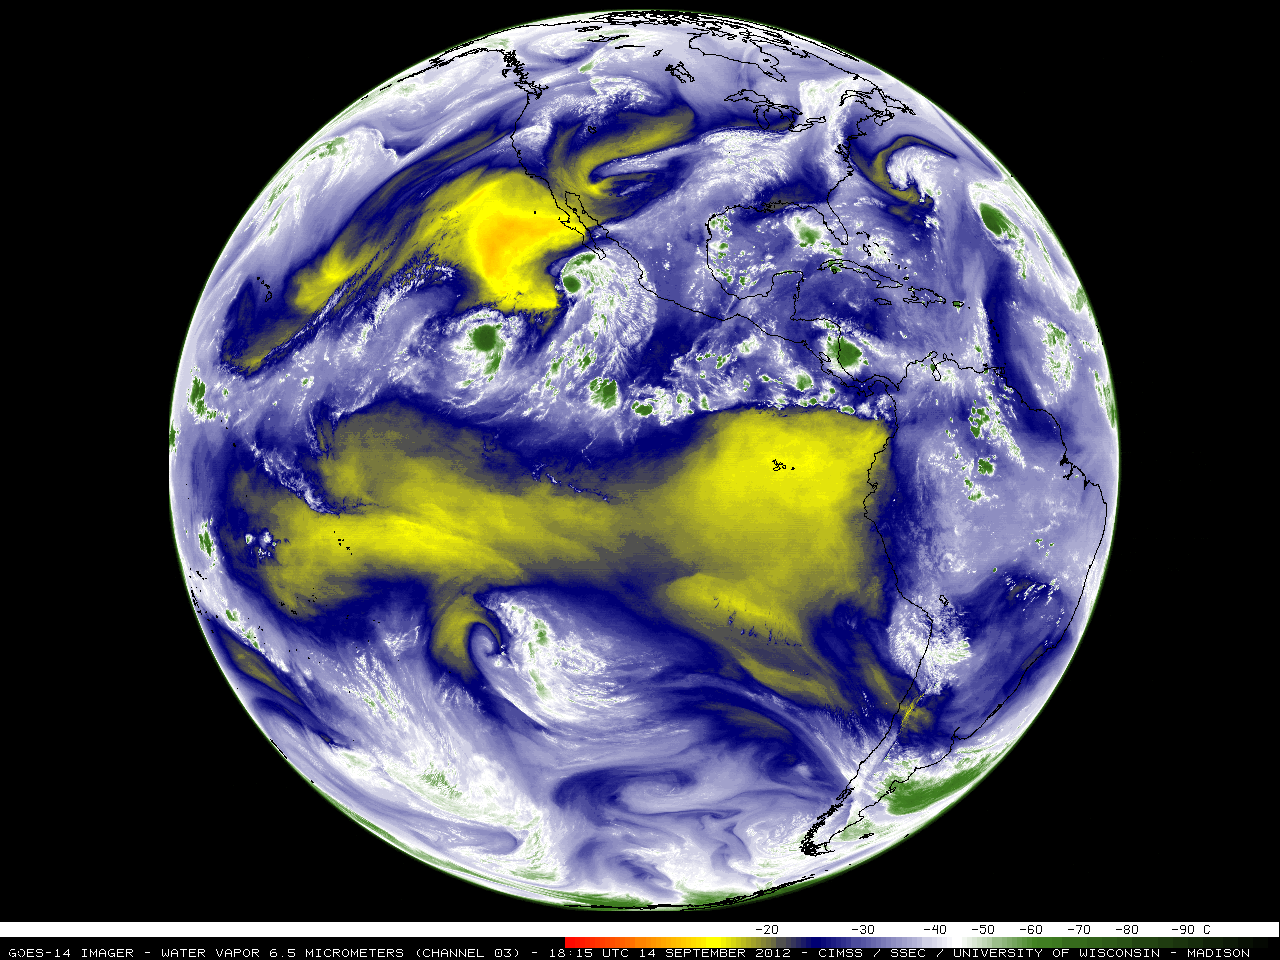 GOES-14 6.5 Âµm water vapor channel images (click image to play animation)